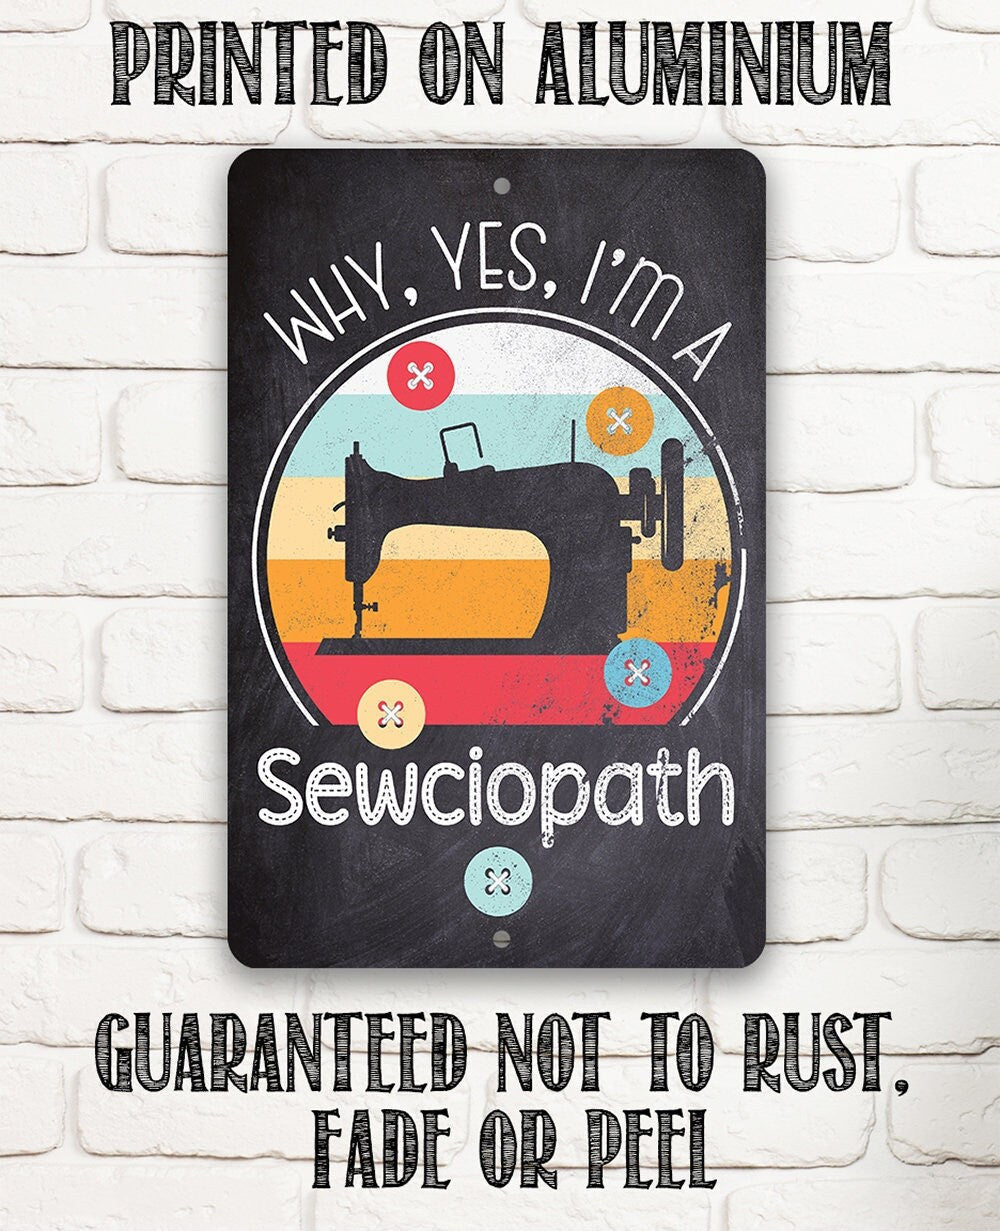 Why, Yes, I'm a Sewciopath - Metal Sign Metal Sign Lone Star Art 